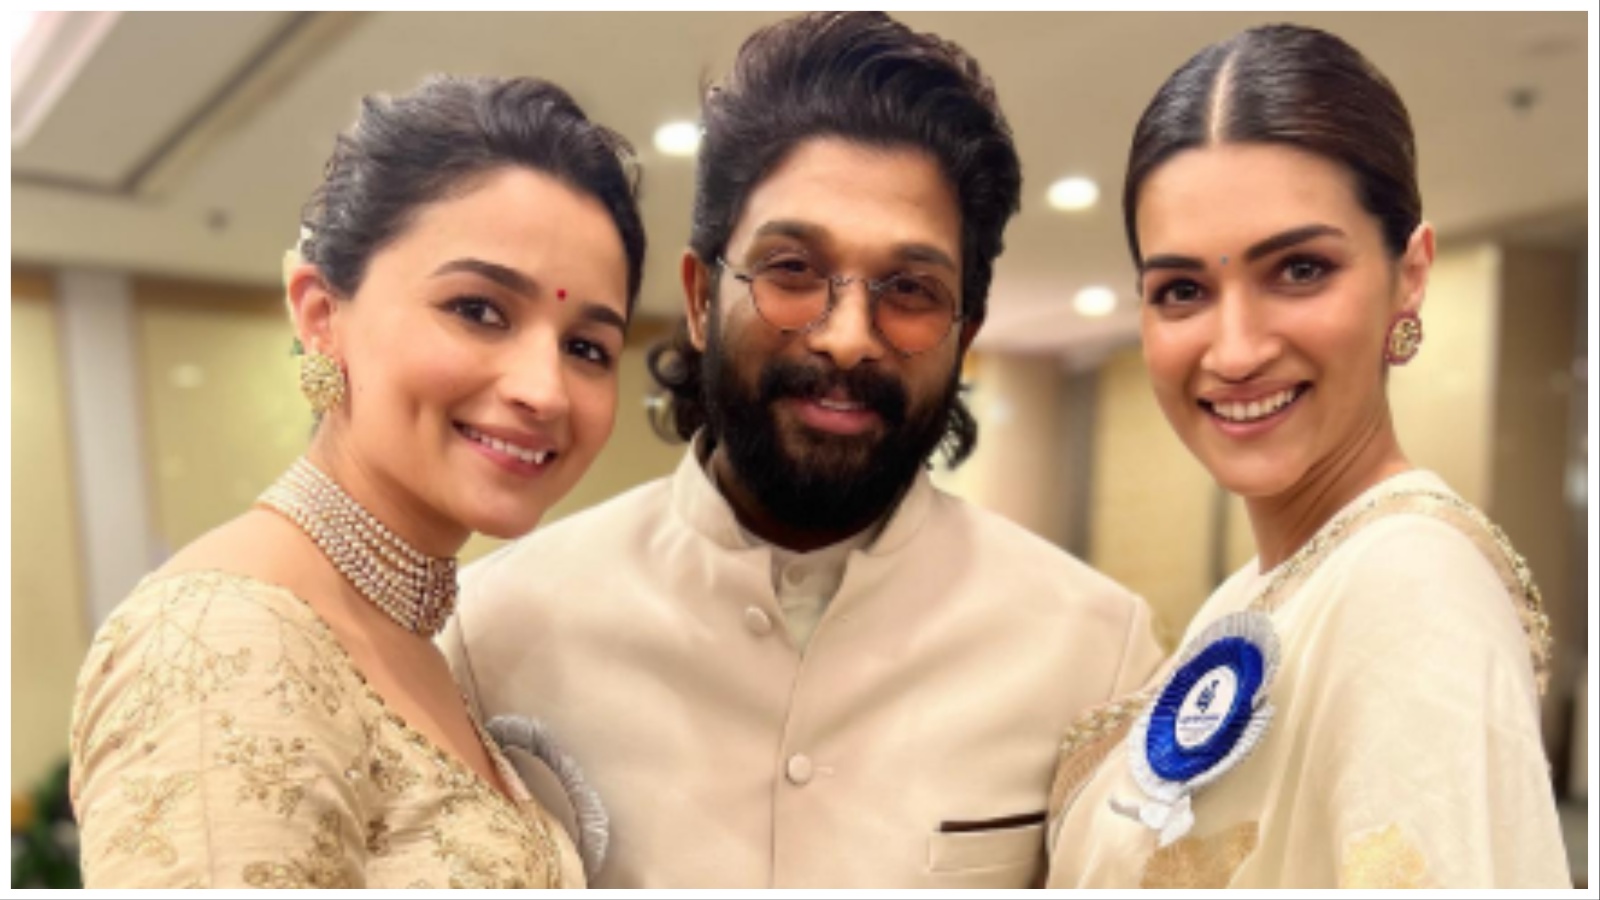 Kriti Sanonxxx - Kriti Sanon shares pics with Allu Arjun and Alia Bhatt from National  Awards: 'Happy faces sharing a proud moment' | Bollywood News - The Indian  Express